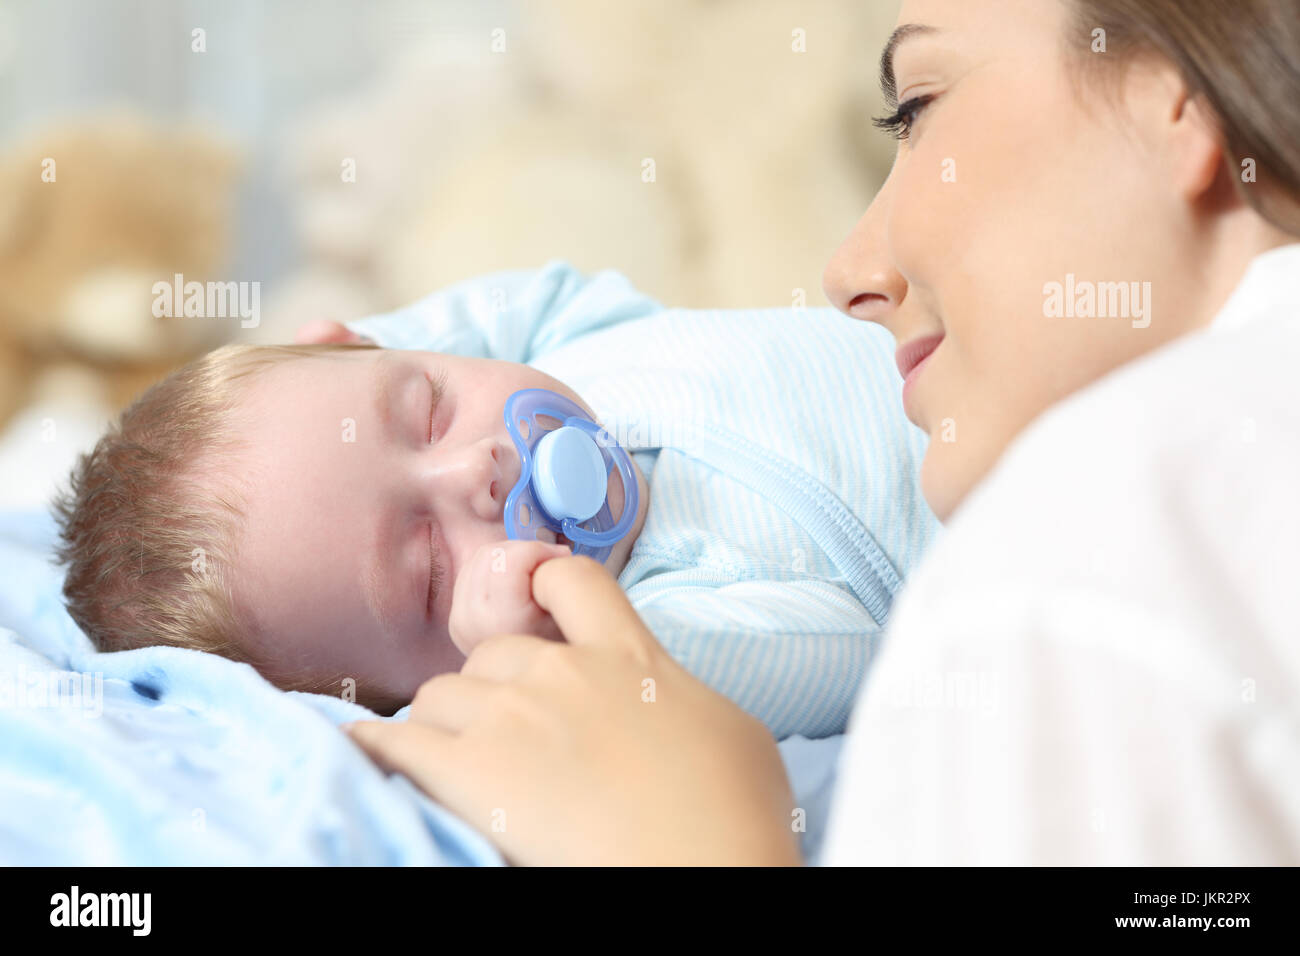 Close up of a mother watching her baby sleeping on a bed Stock Photo